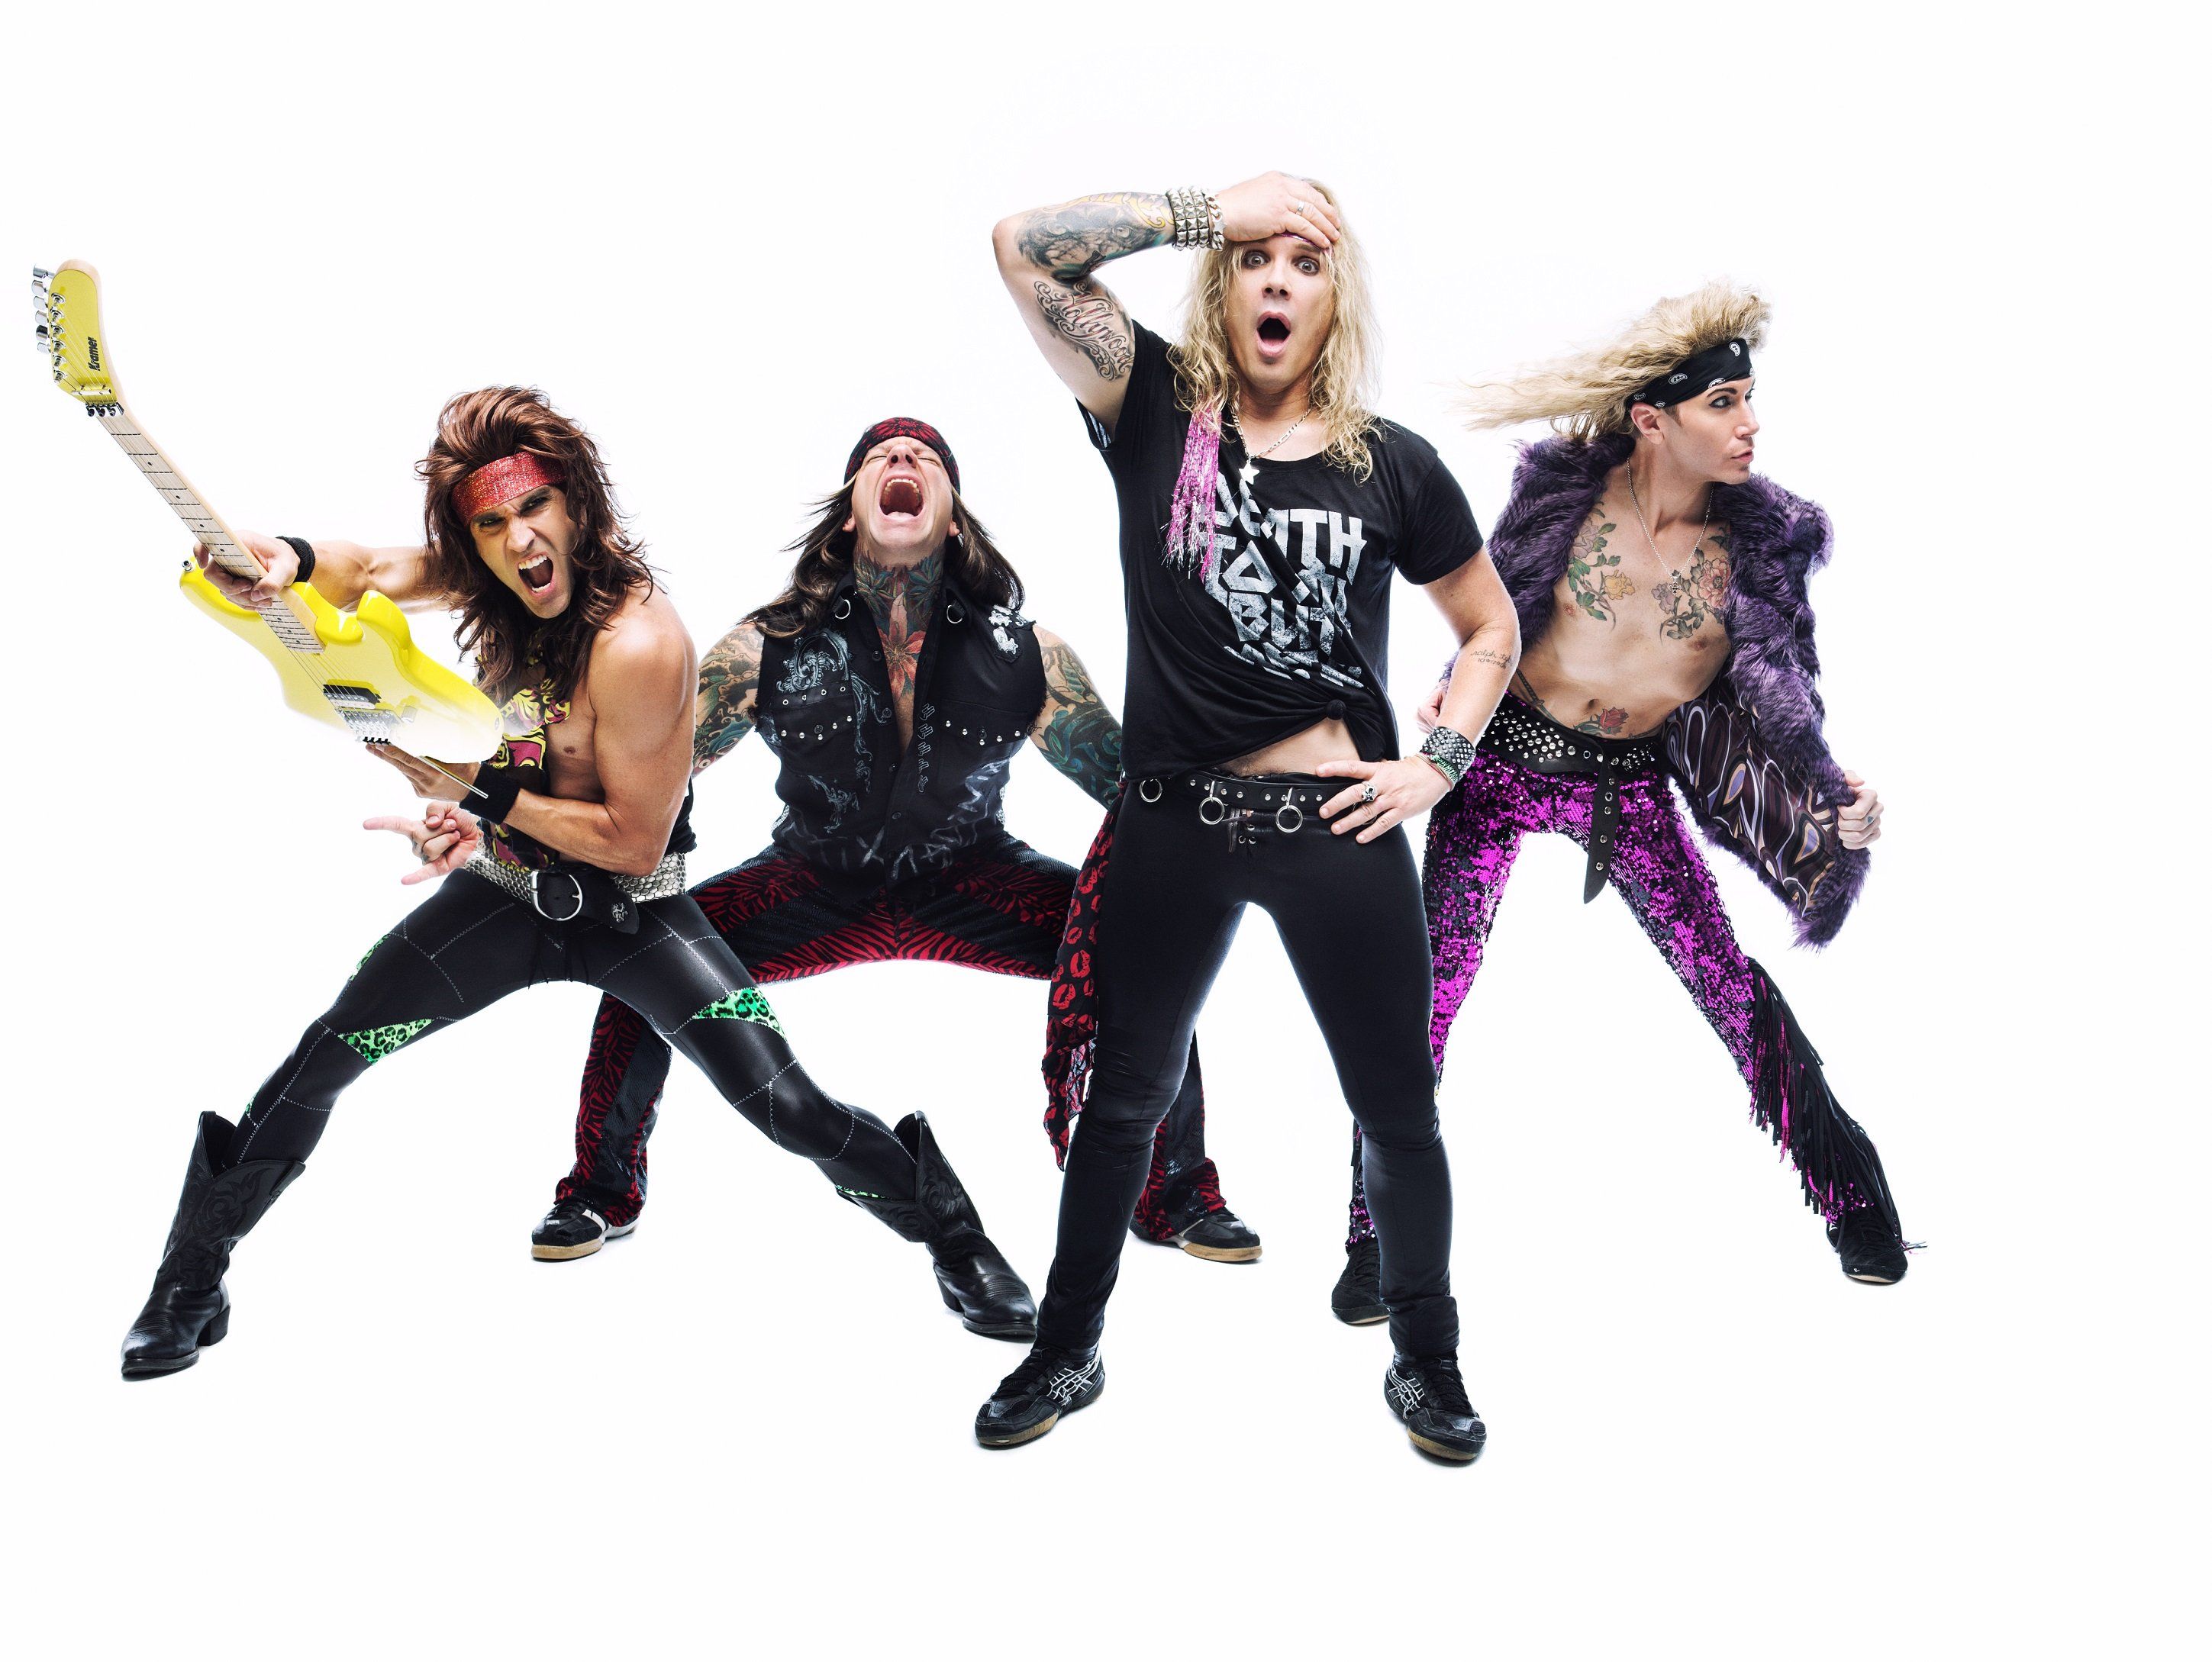 steel, Panther, Hair, Metal, Heavy, Glam, Cp Wallpapers HD.